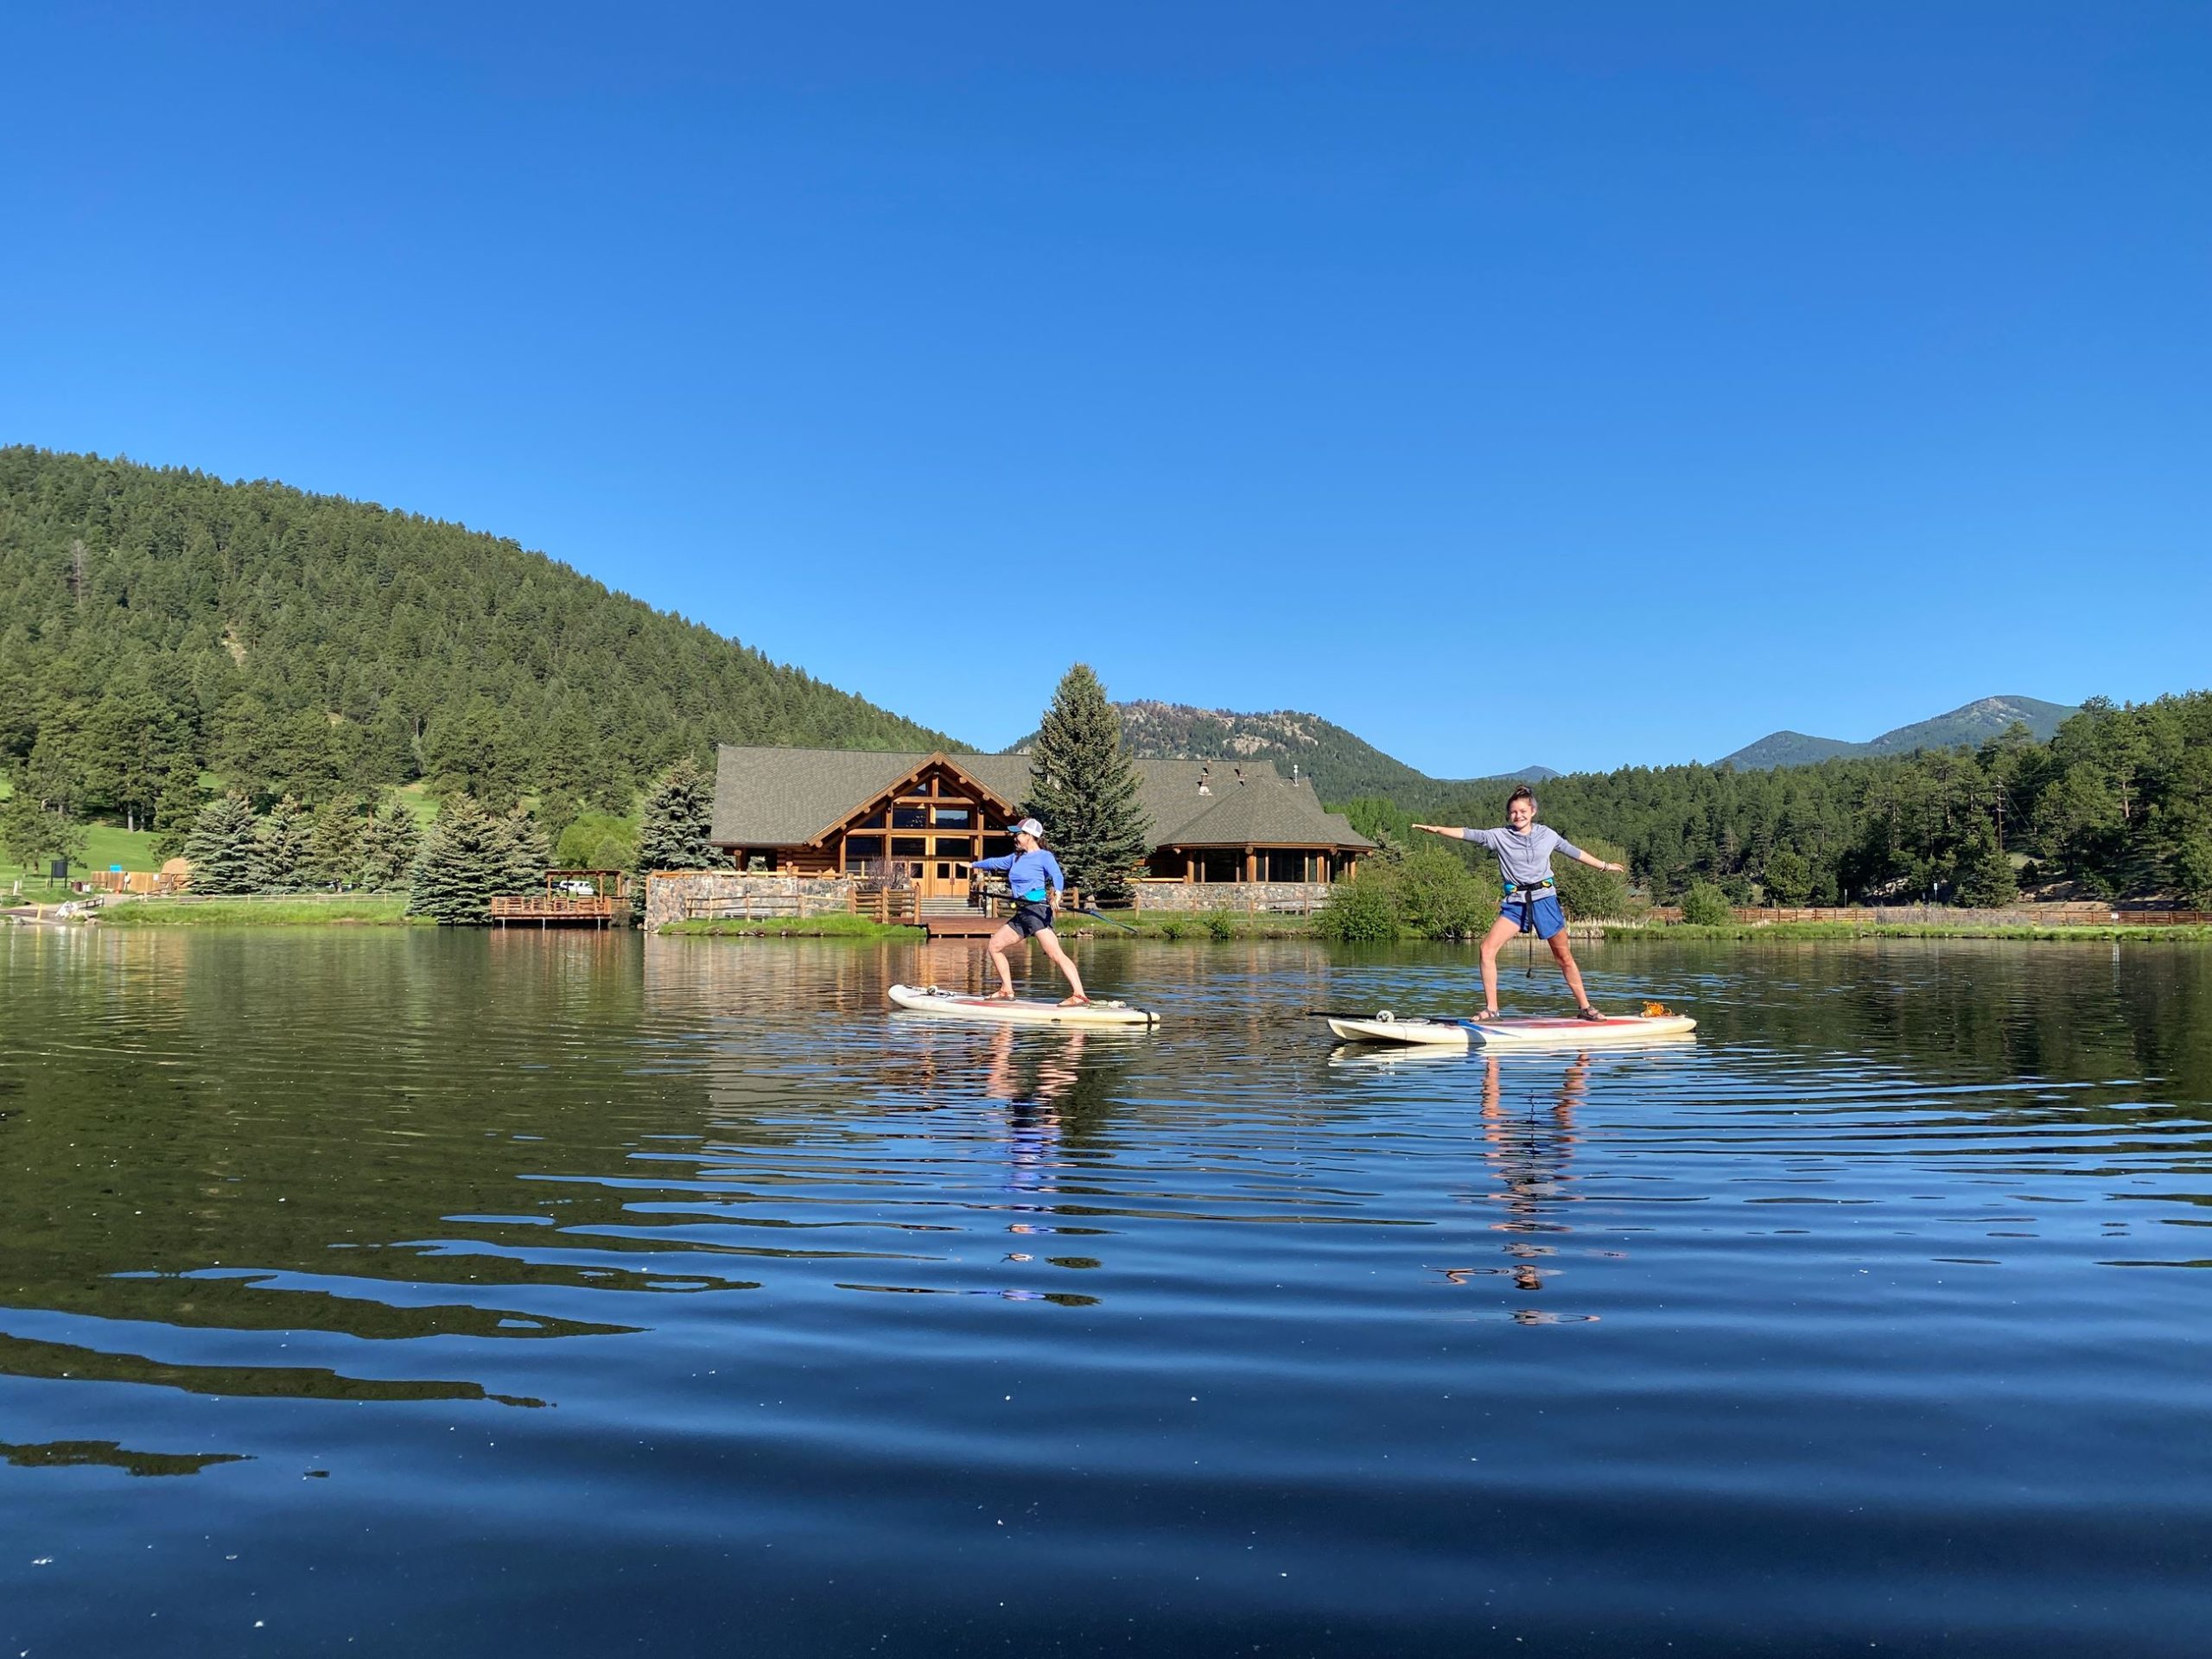 Two people doing stand up paddle boarding on Evergreen Lake in Colorado.